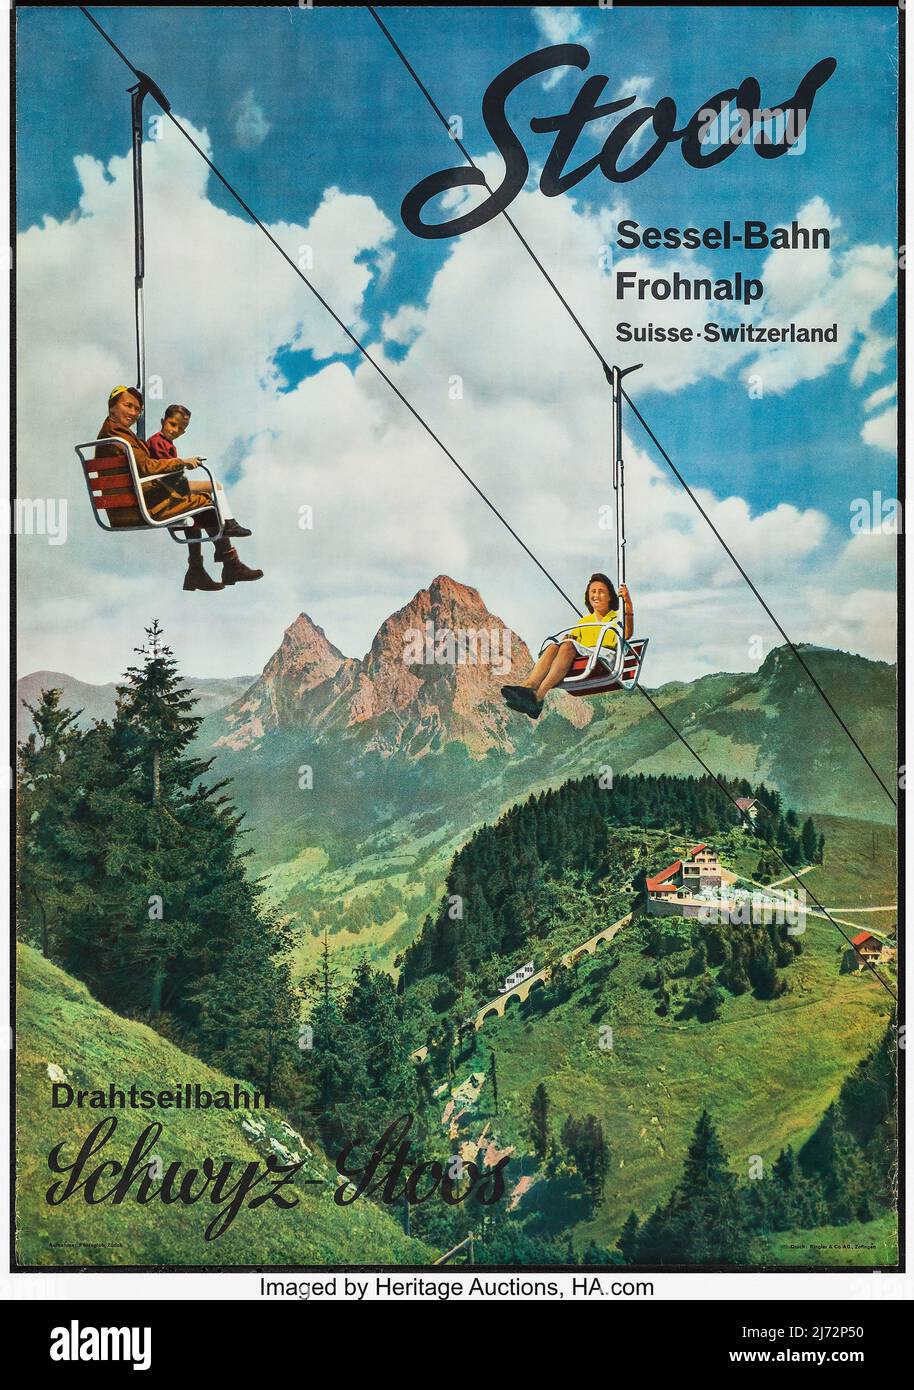 Stoos, Switzerland (1958). Rolled, Very Fine-. Swiss Travel Poster (27.5' X 39.5'). Miscellaneous. Featured is a Swiss travel poster advertising for t Stock Photo